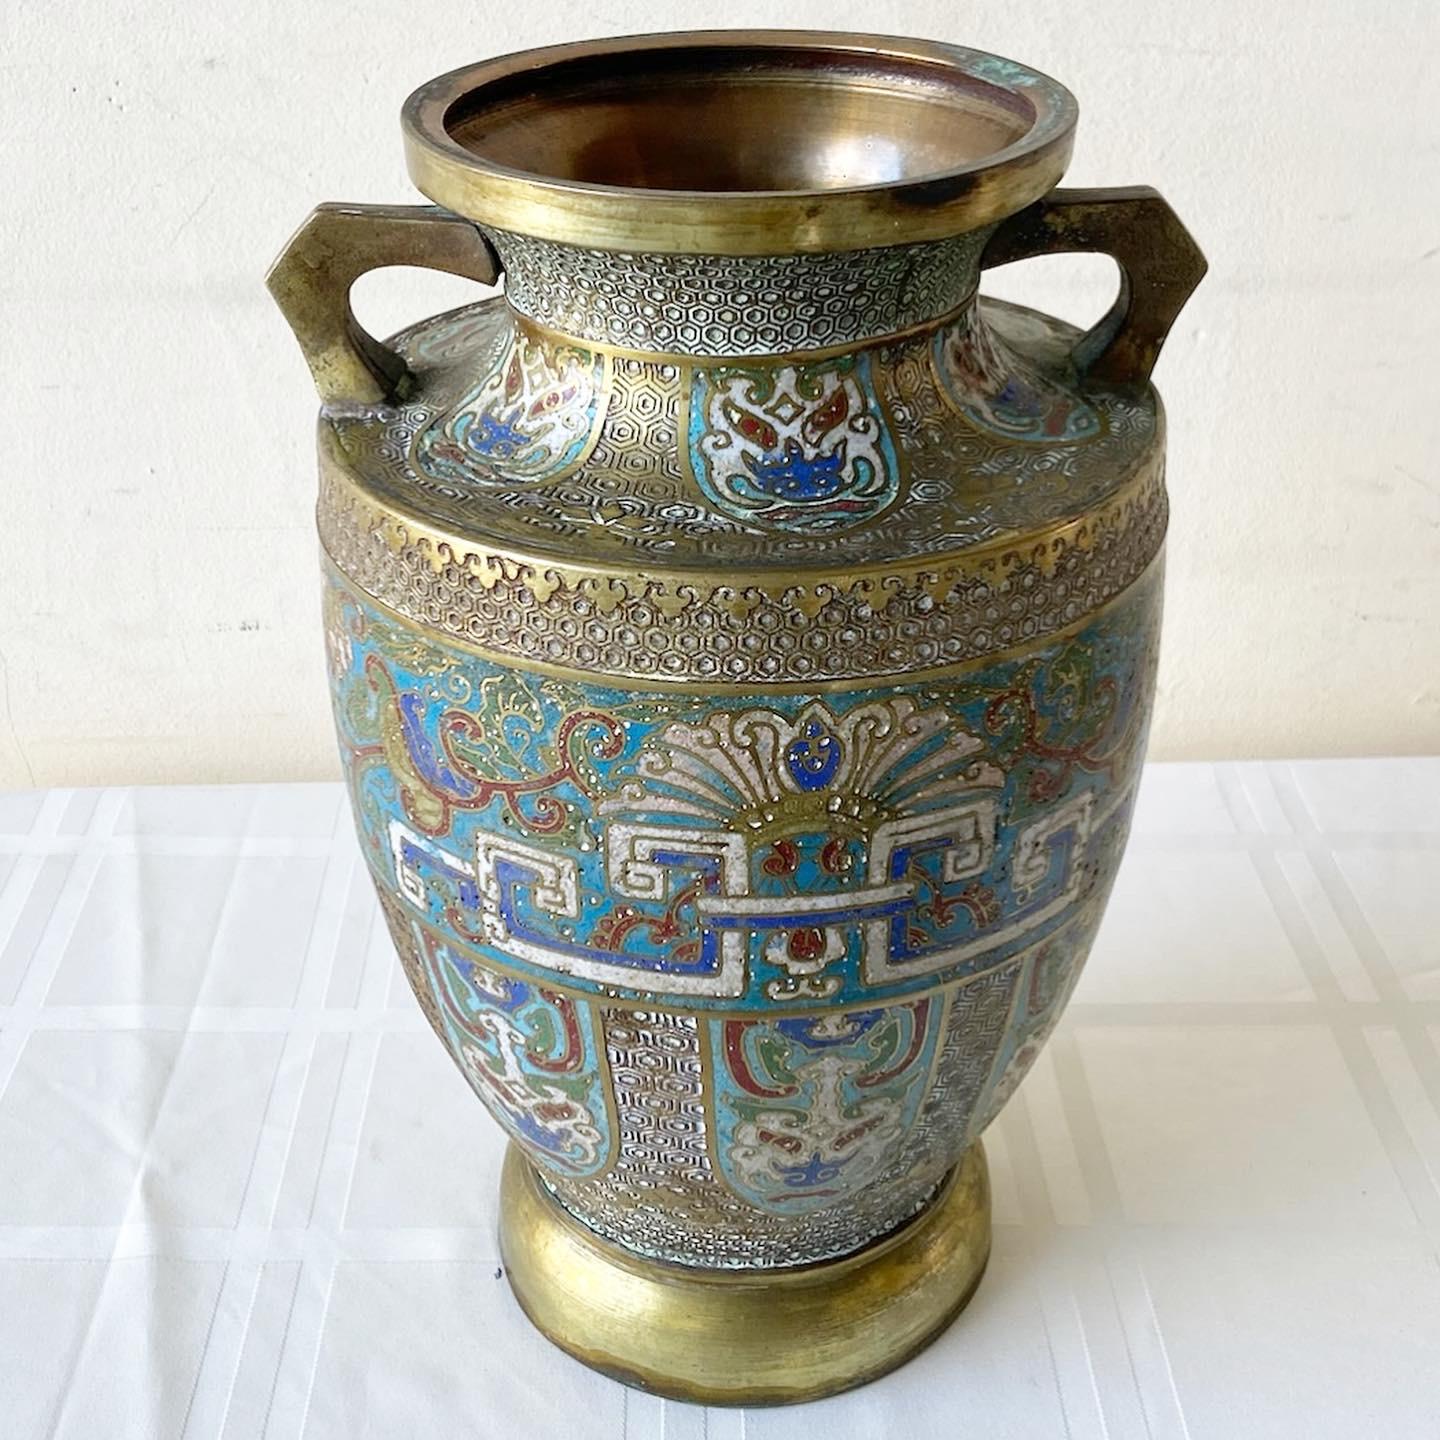 Exceptional vintage early 20th century champleve brass vase. Features a vibrant enamel design throughout the vase.
 